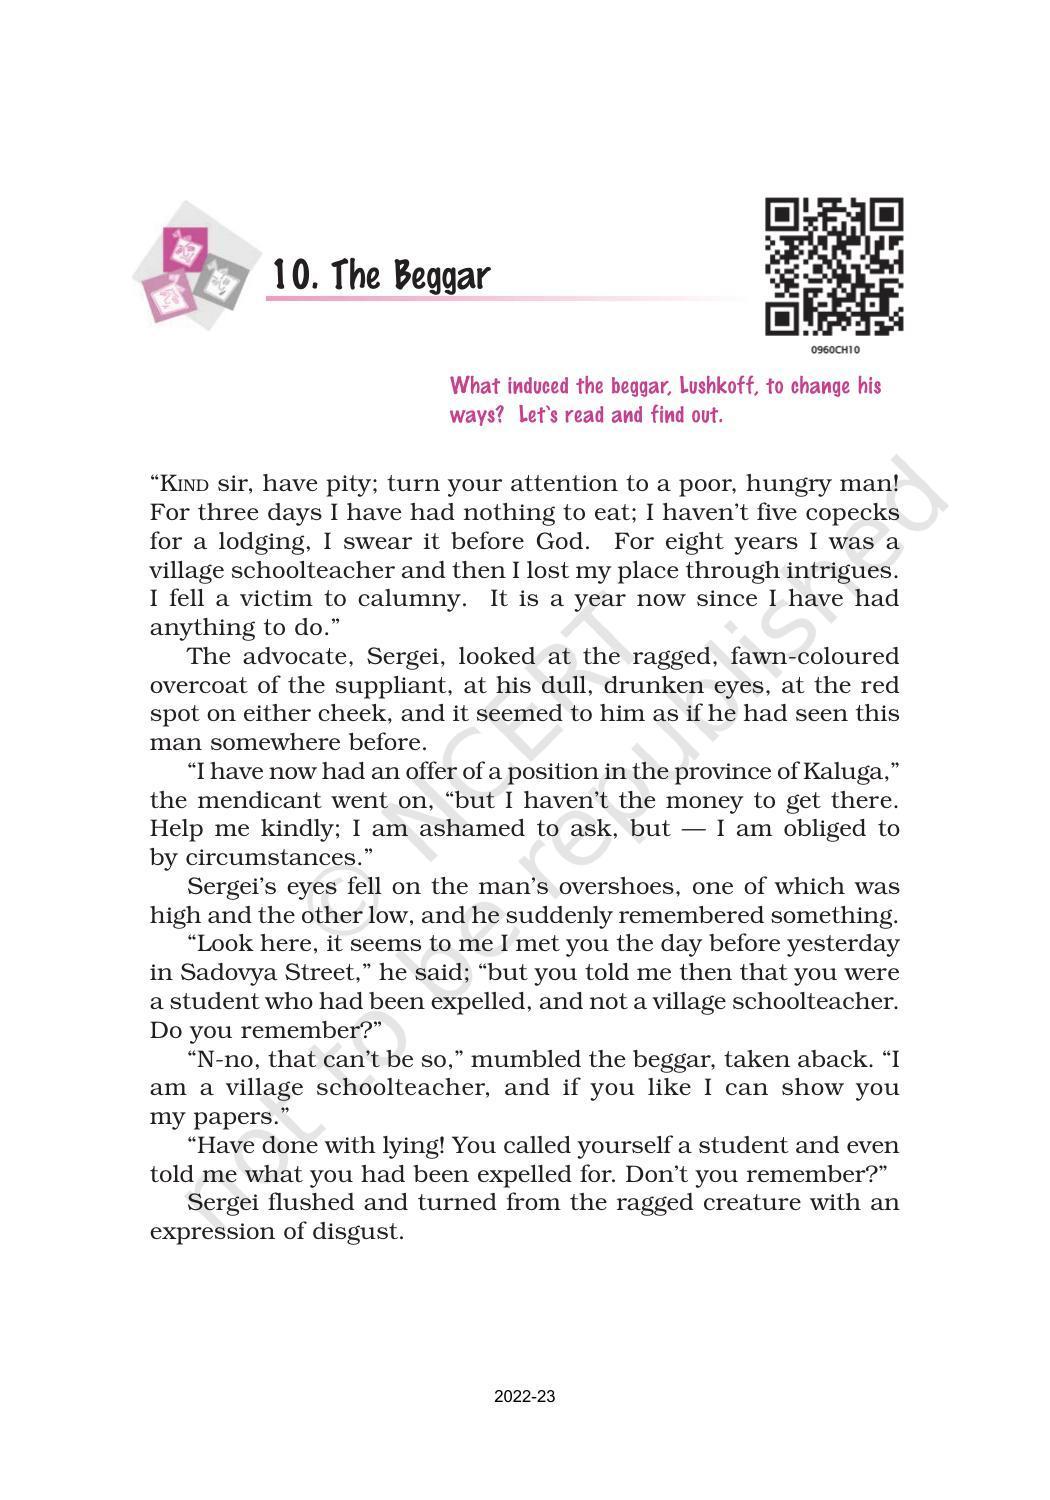 NCERT Book for Class 9 English Moment Chapter 10 The Beggar - Page 1